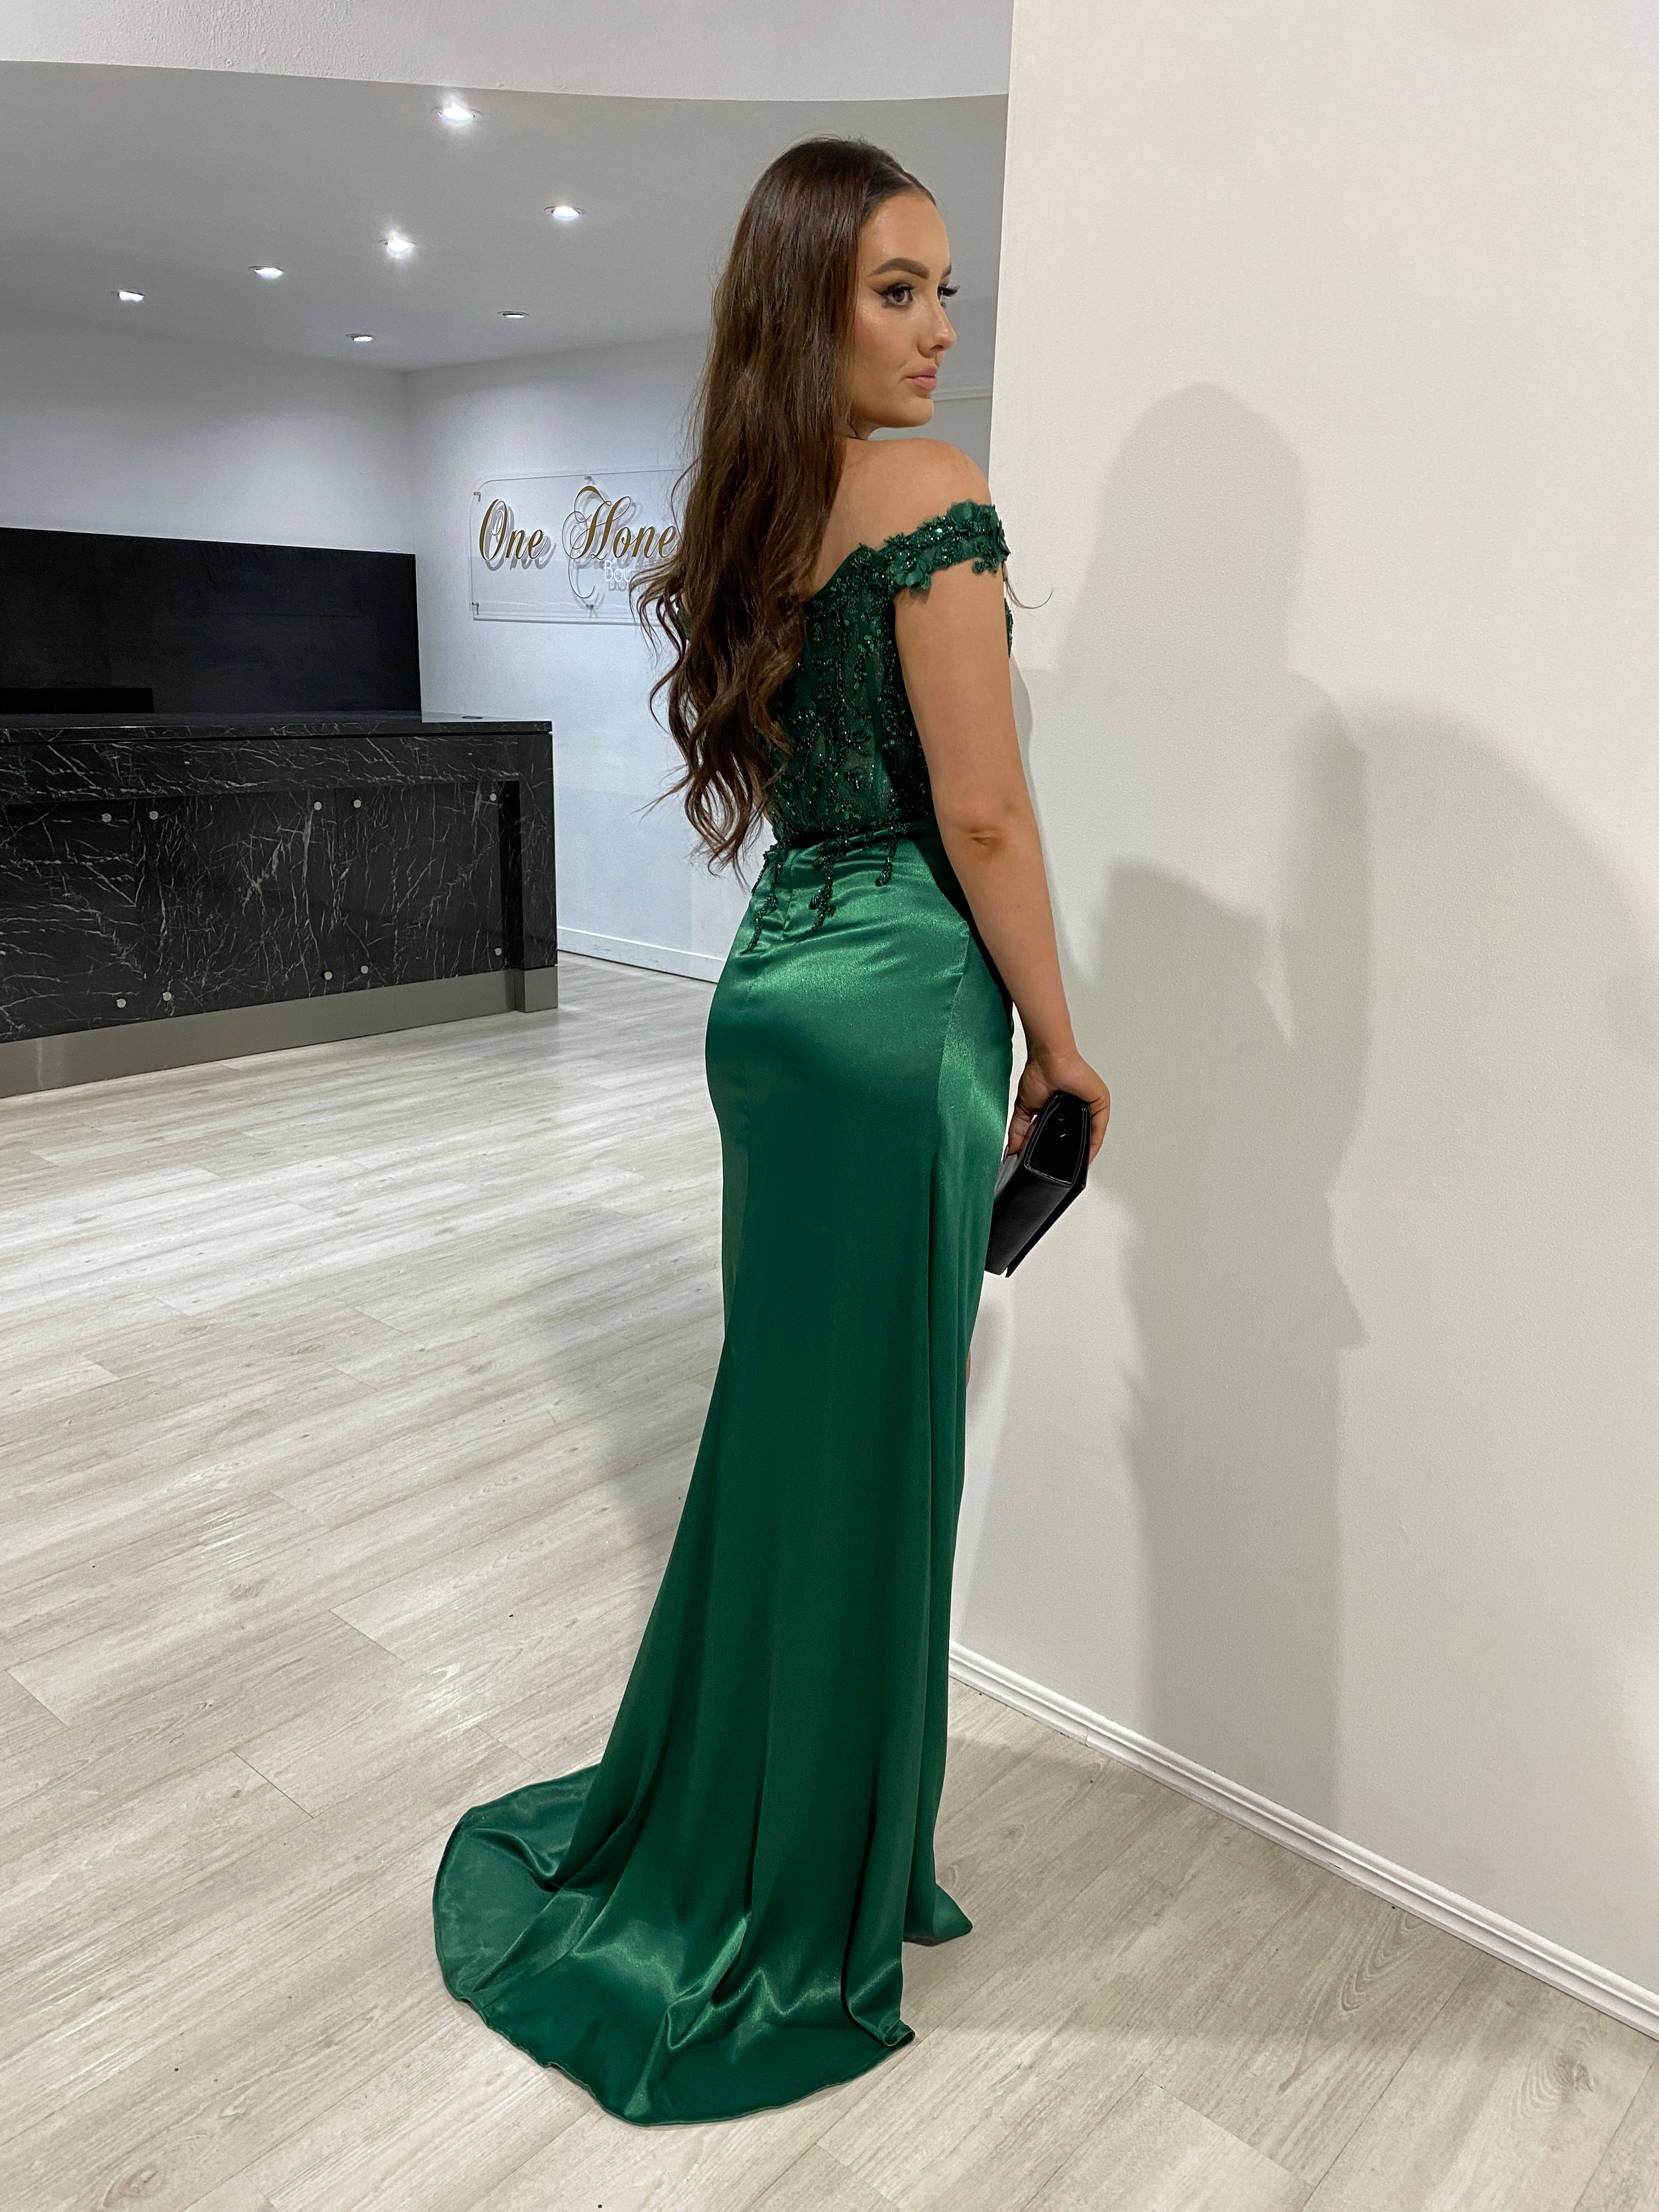 Honey Couture THELMA Emerald Green Sequin Bustier Corset Satin Mermaid Formal Dress  (RED TAG FINAL SALE)